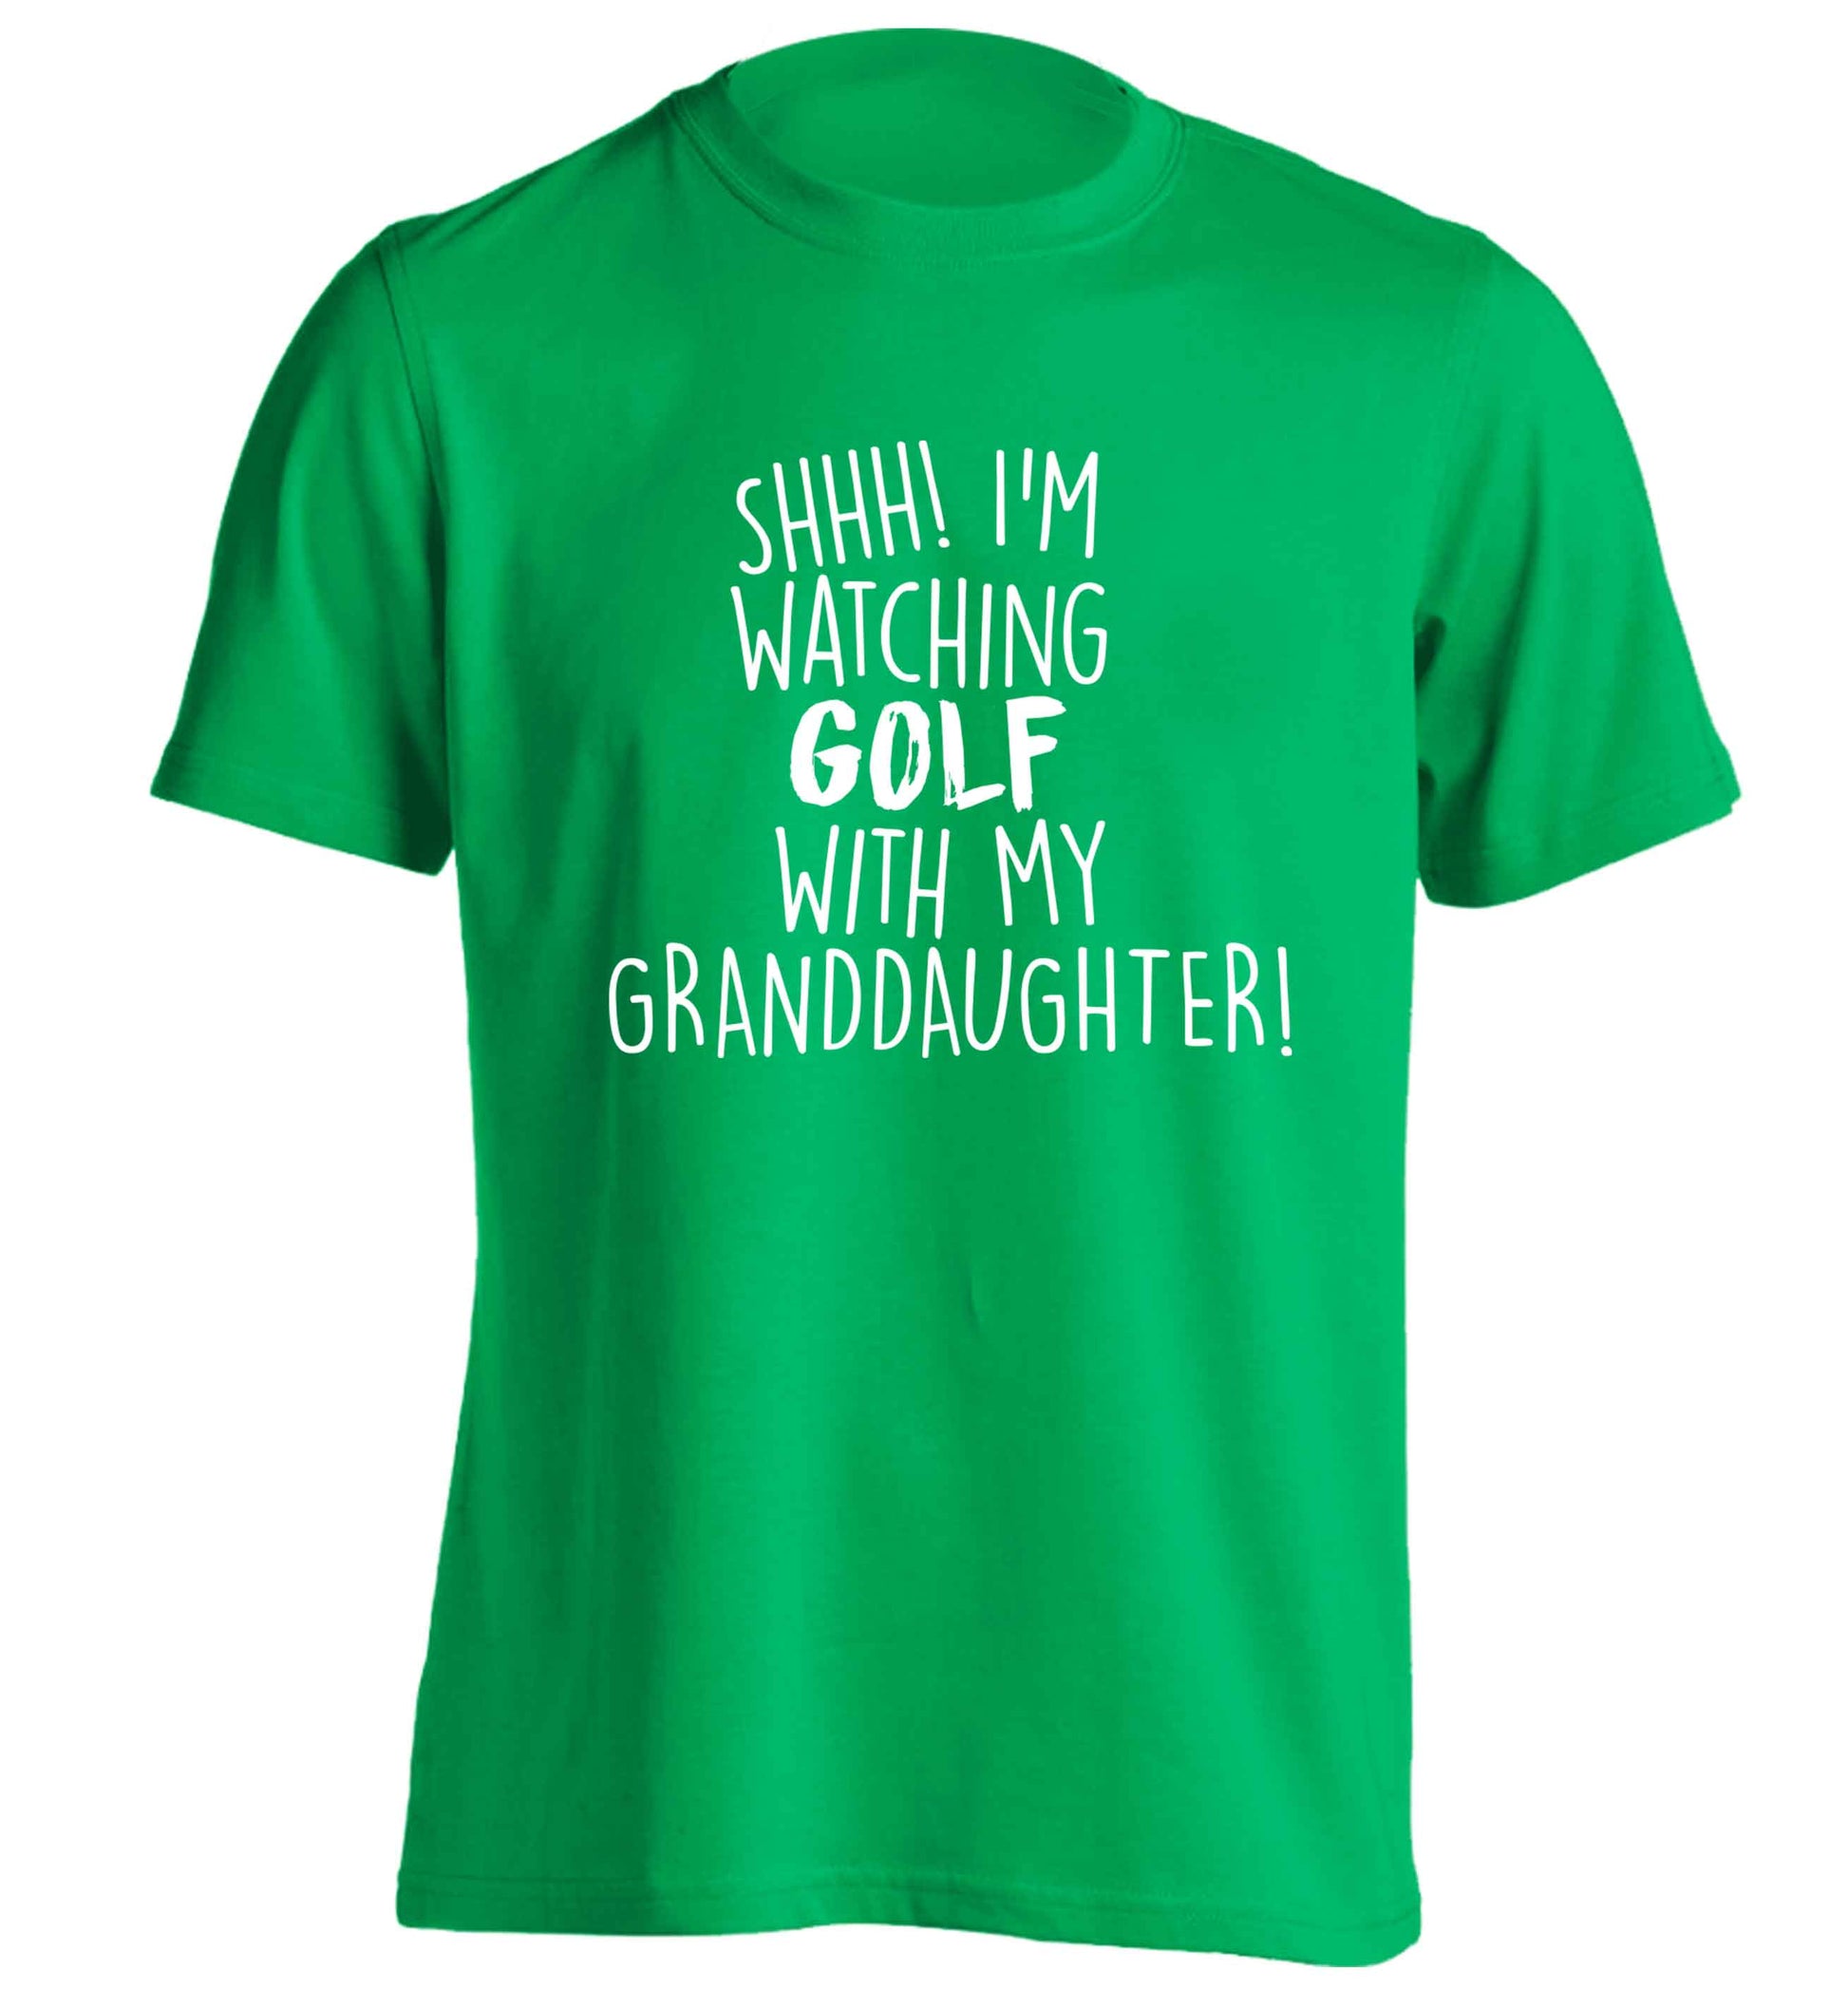 Shh I'm watching golf with my granddaughter adults unisex green Tshirt 2XL